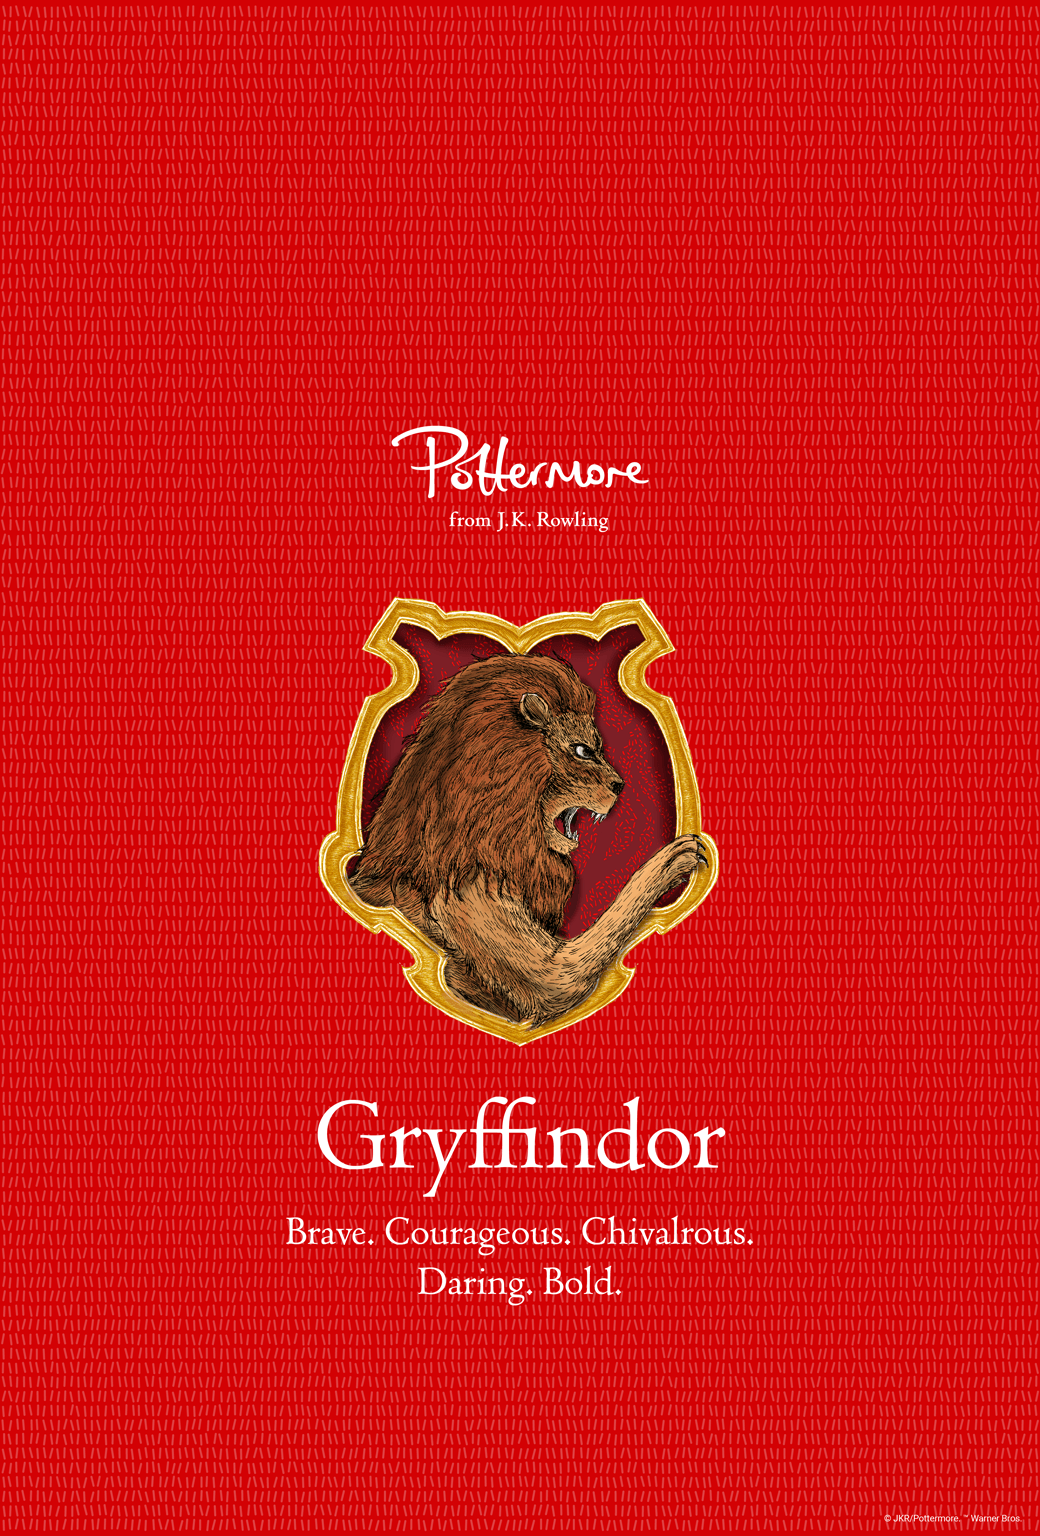 Pm Pride Gryffindor IPhone Wallpaper 1040 X 1536 Px.png 1040×1536